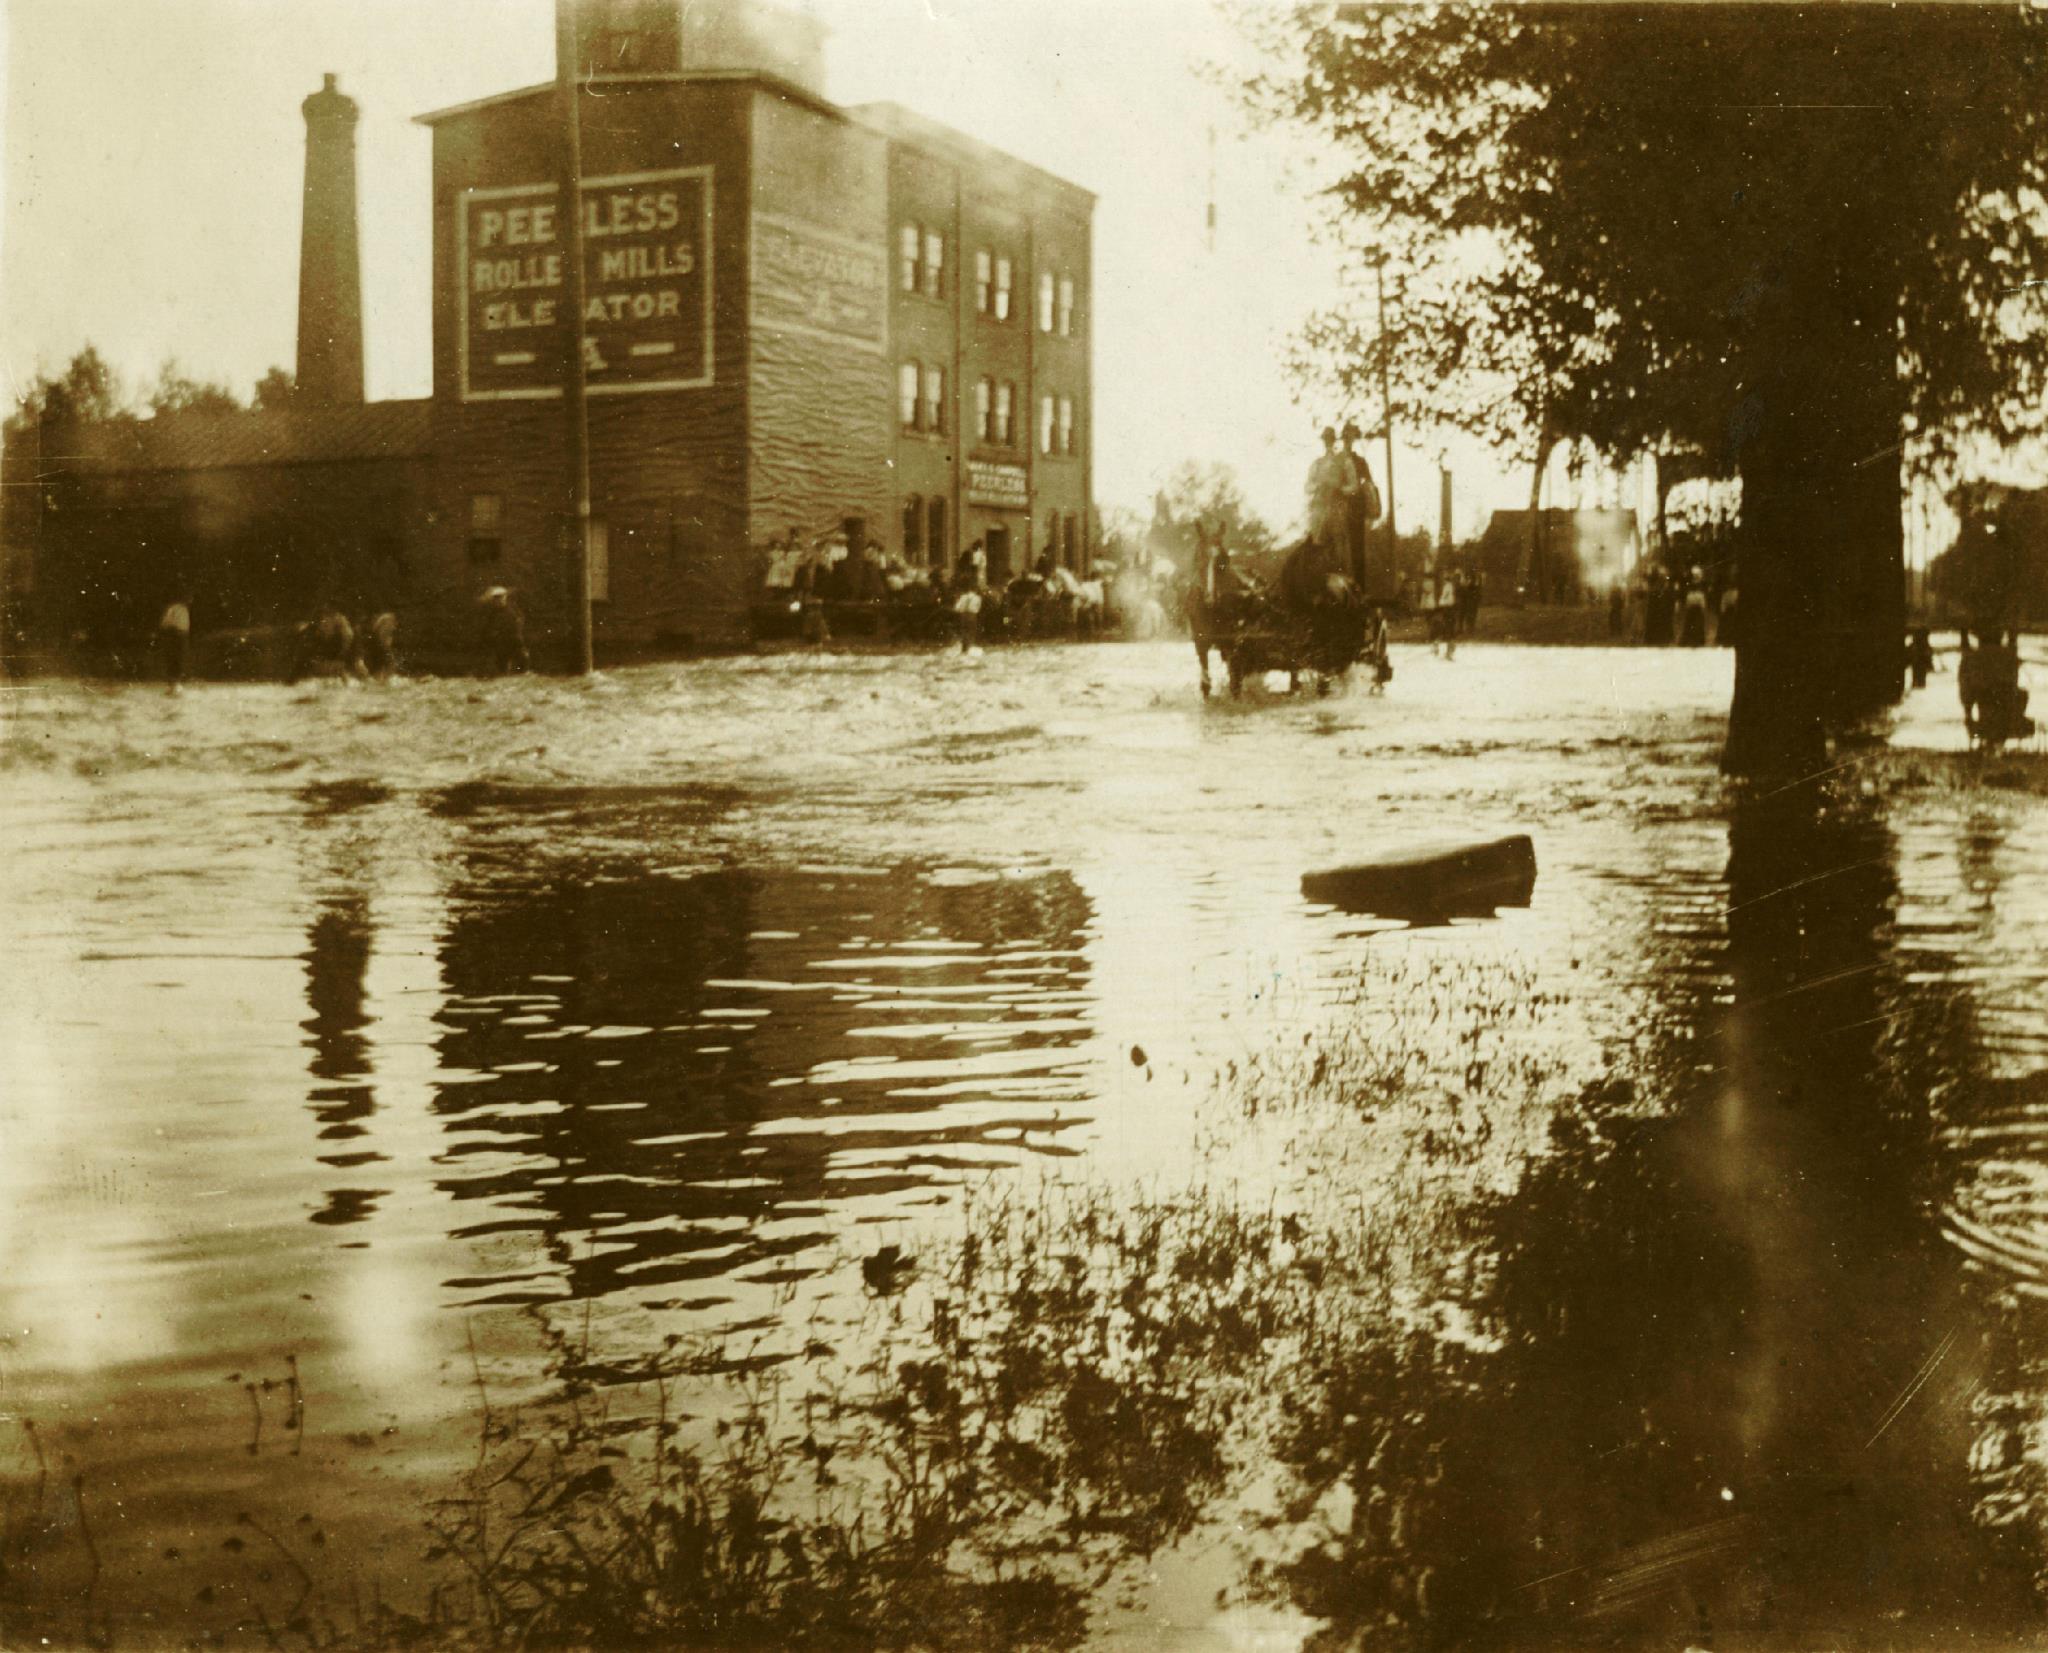 Residents-of-Austin-appear-stranded-on-the-porch-of-the-Peerless-Mill-1908-flood